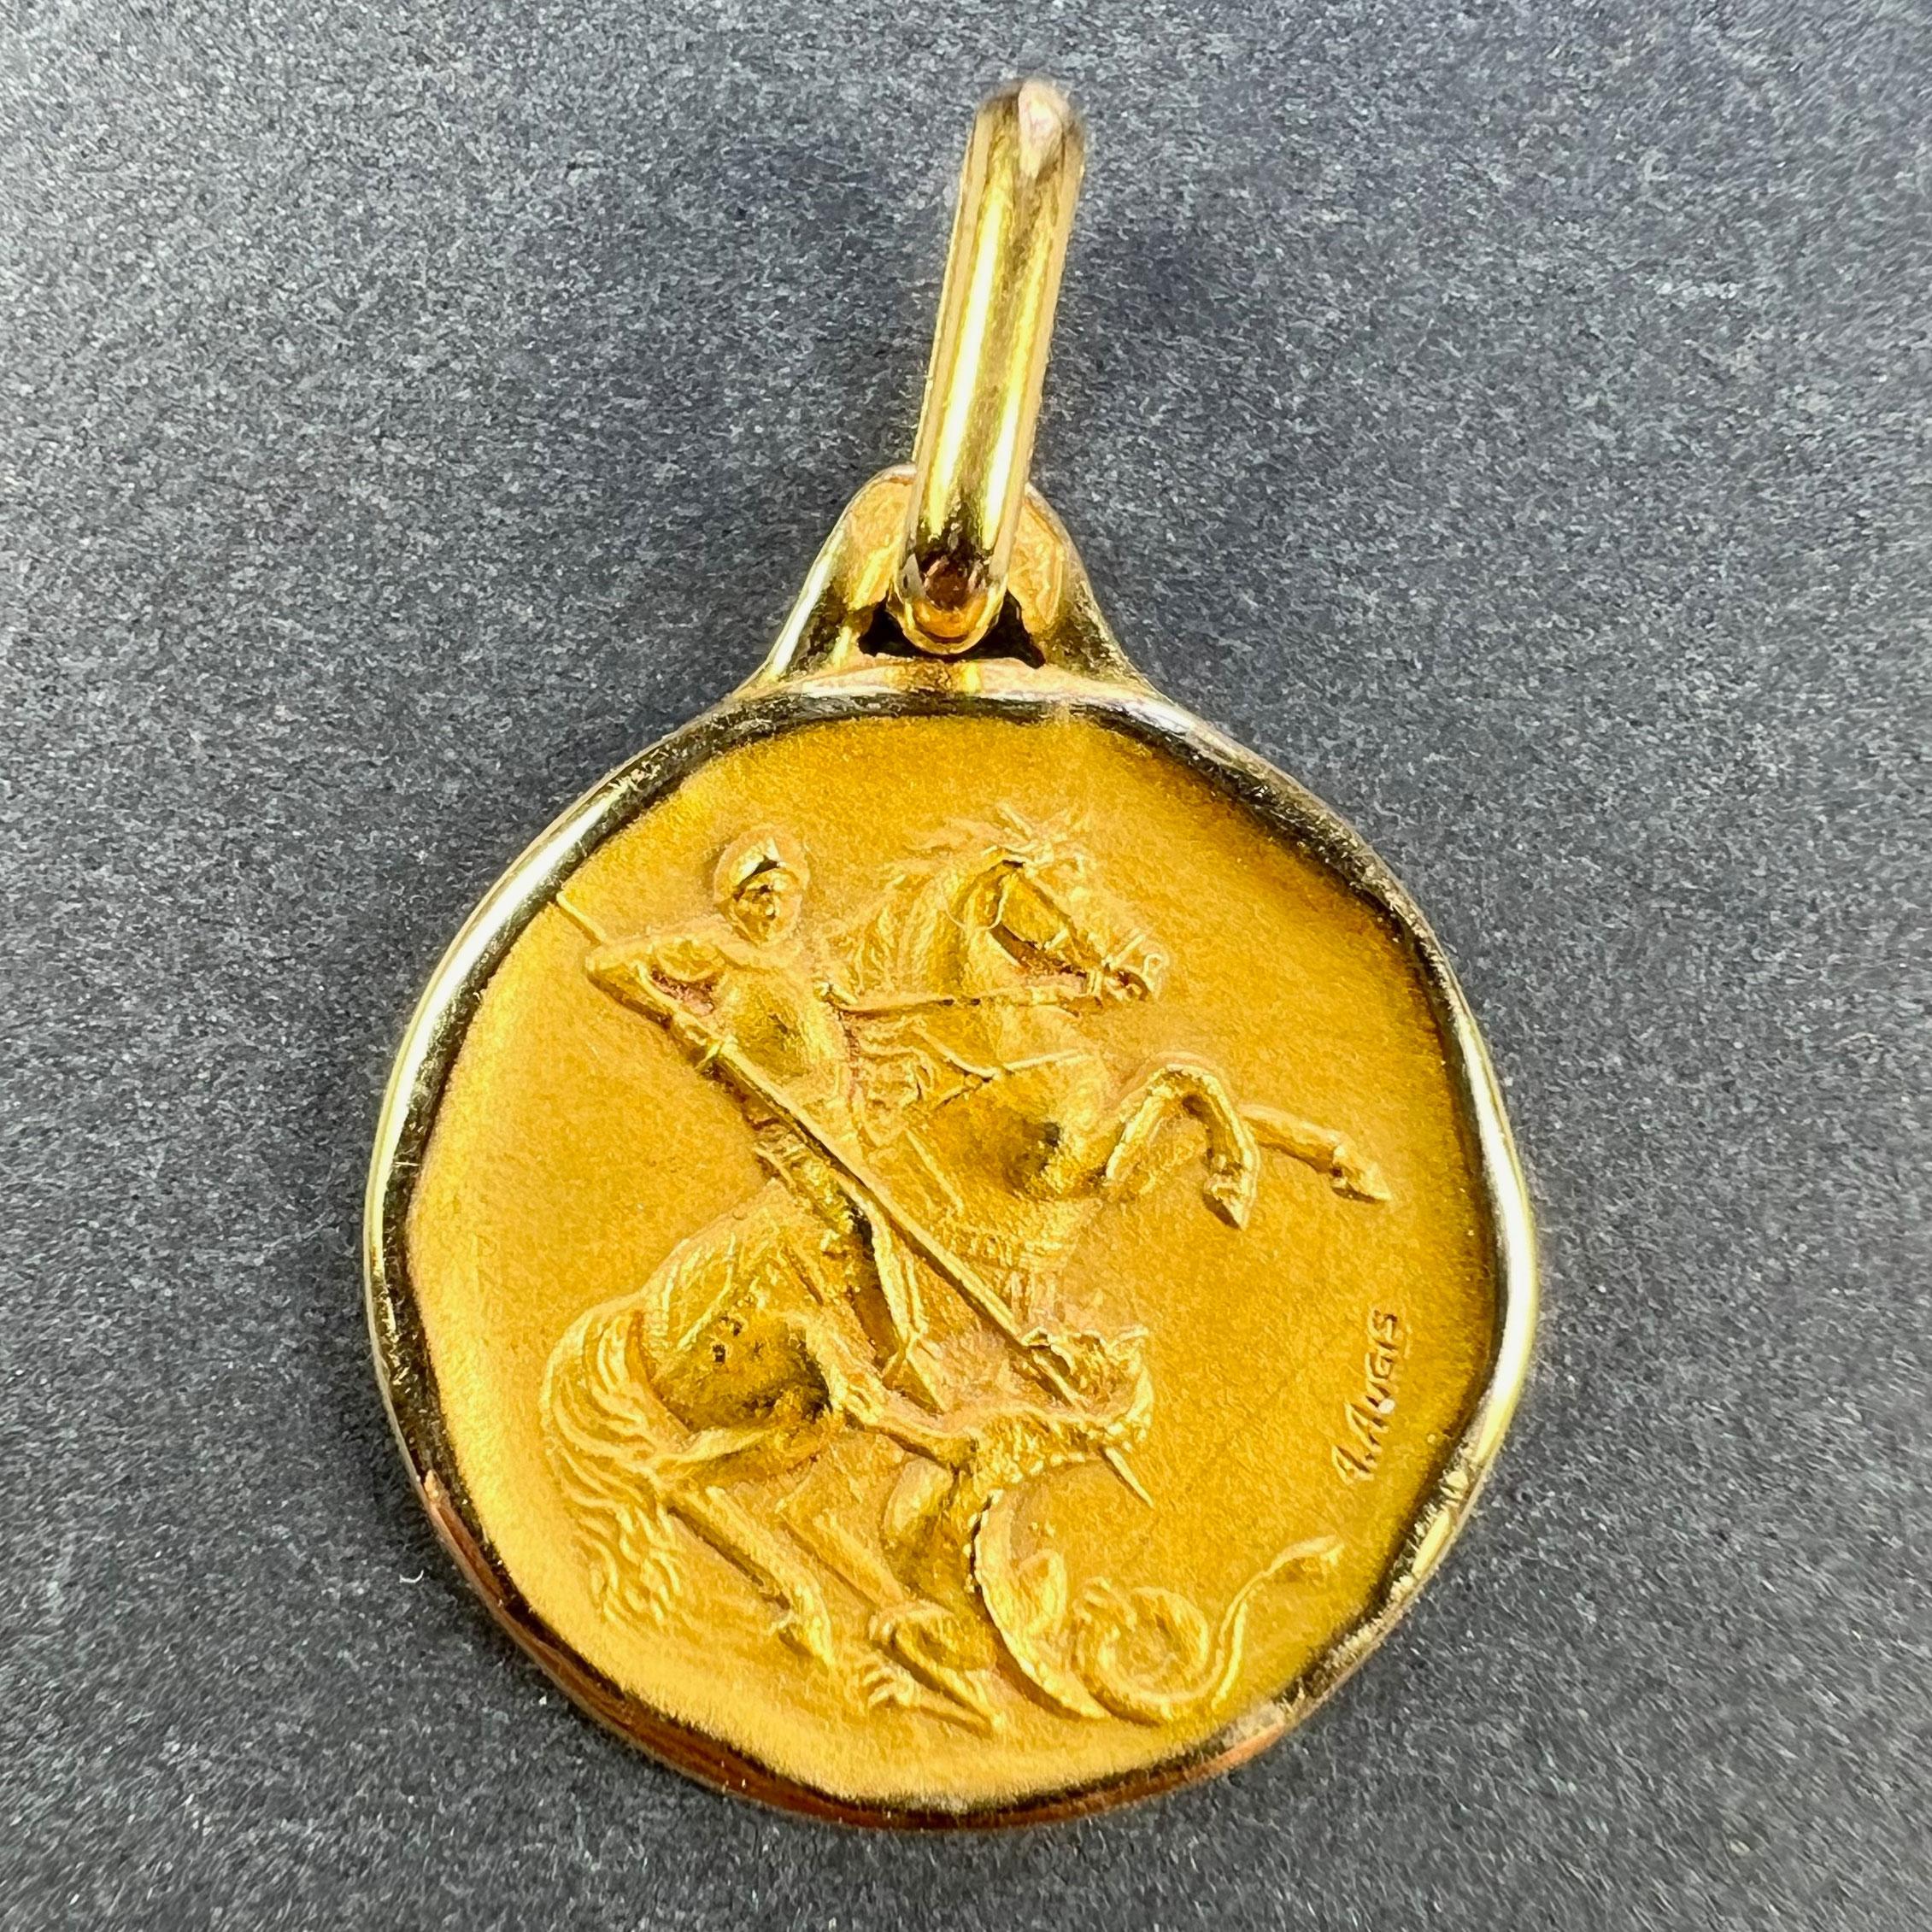 A French 18 karat (18K) yellow gold charm pendant designed as a medal depicting St George on a horse defeating the dragon. Signed A. Augis, stamped with the eagle's head for French manufacture and 18 karat gold with Augis's maker’s mark.